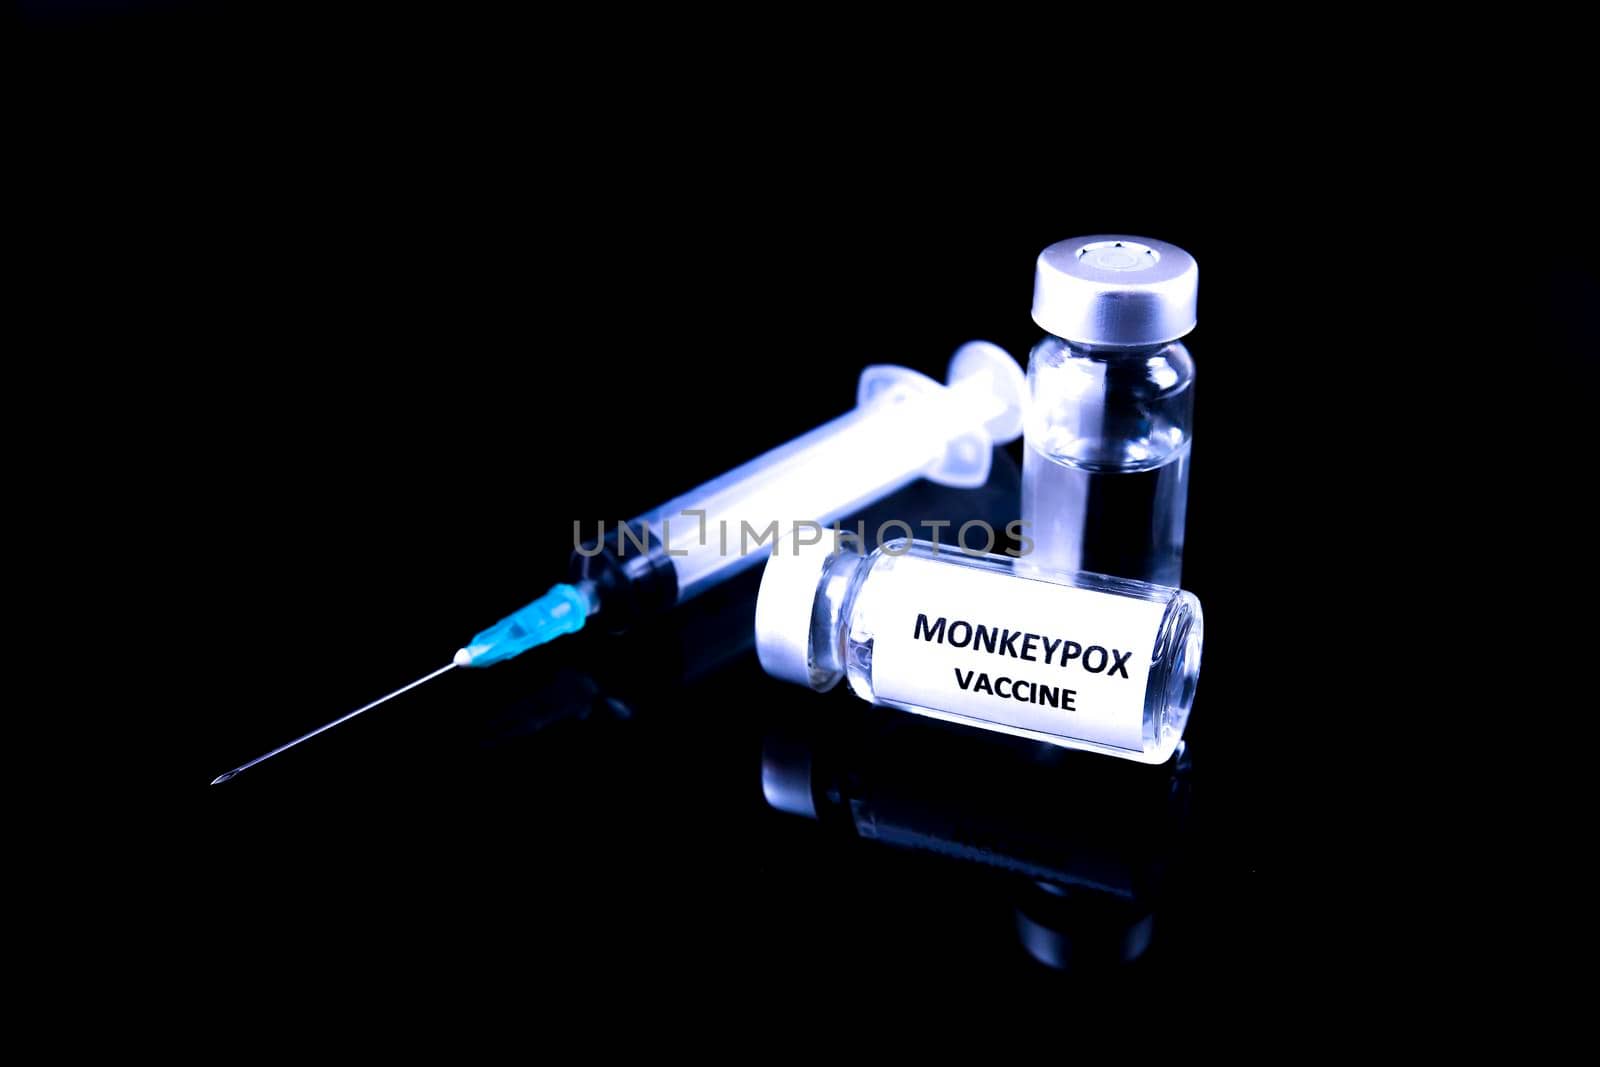 Vials filled and syringe with Monkeypox vaccine by soniabonet